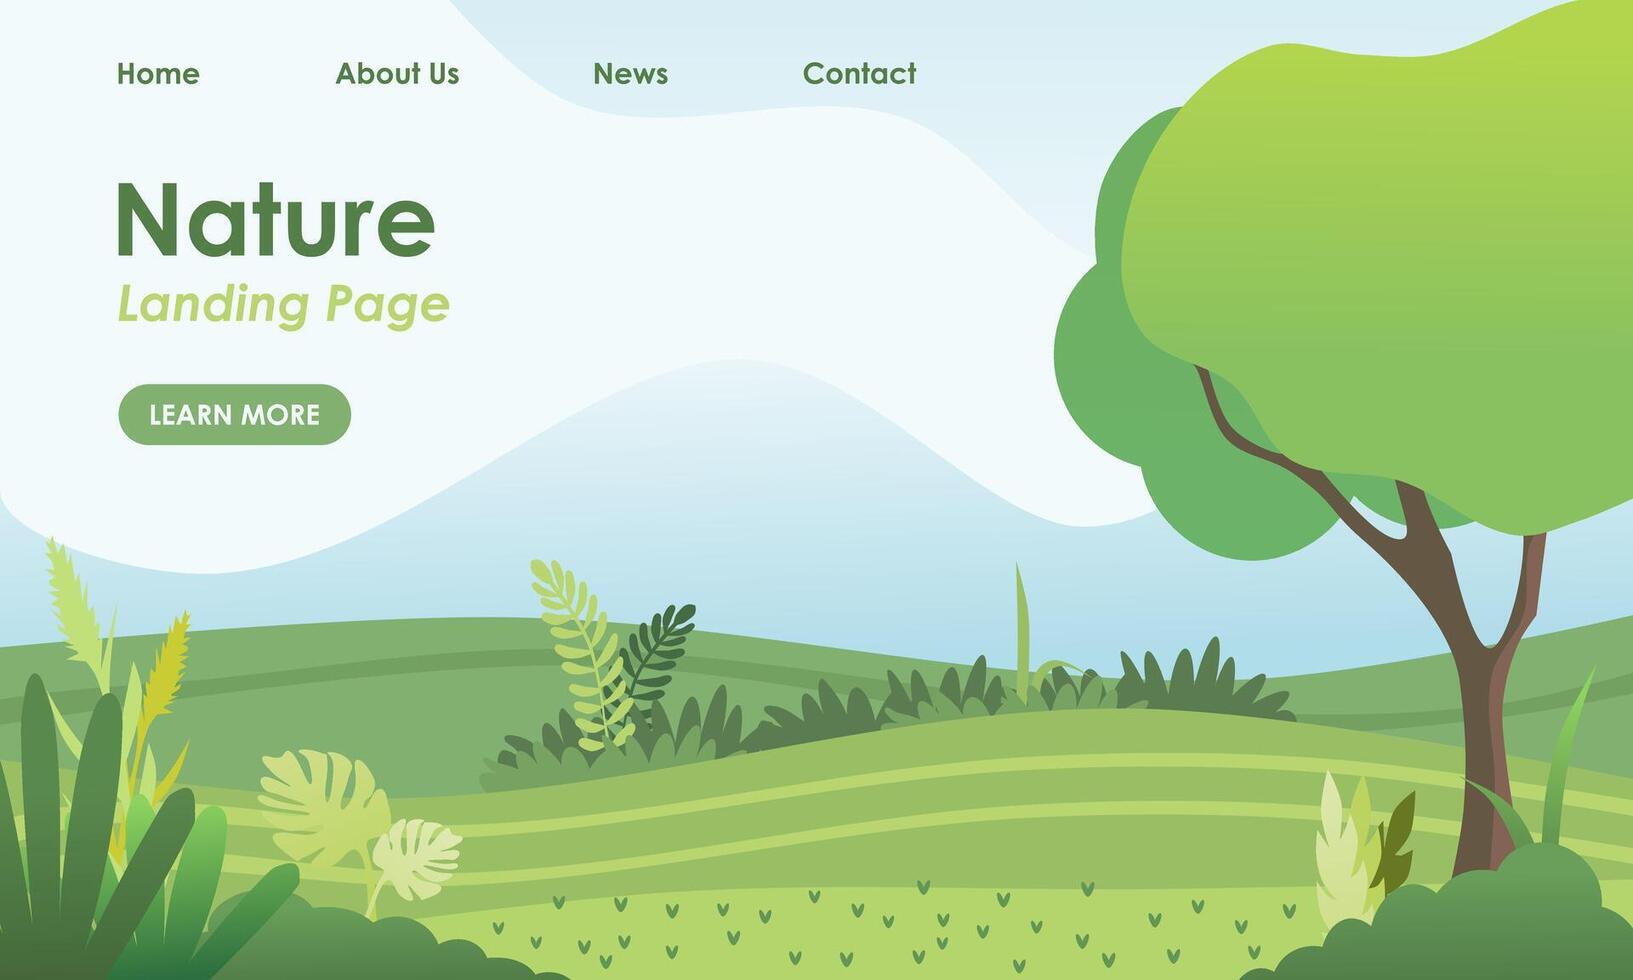 Landing page layout with illustration of nature or go green concept. Vector illustration.